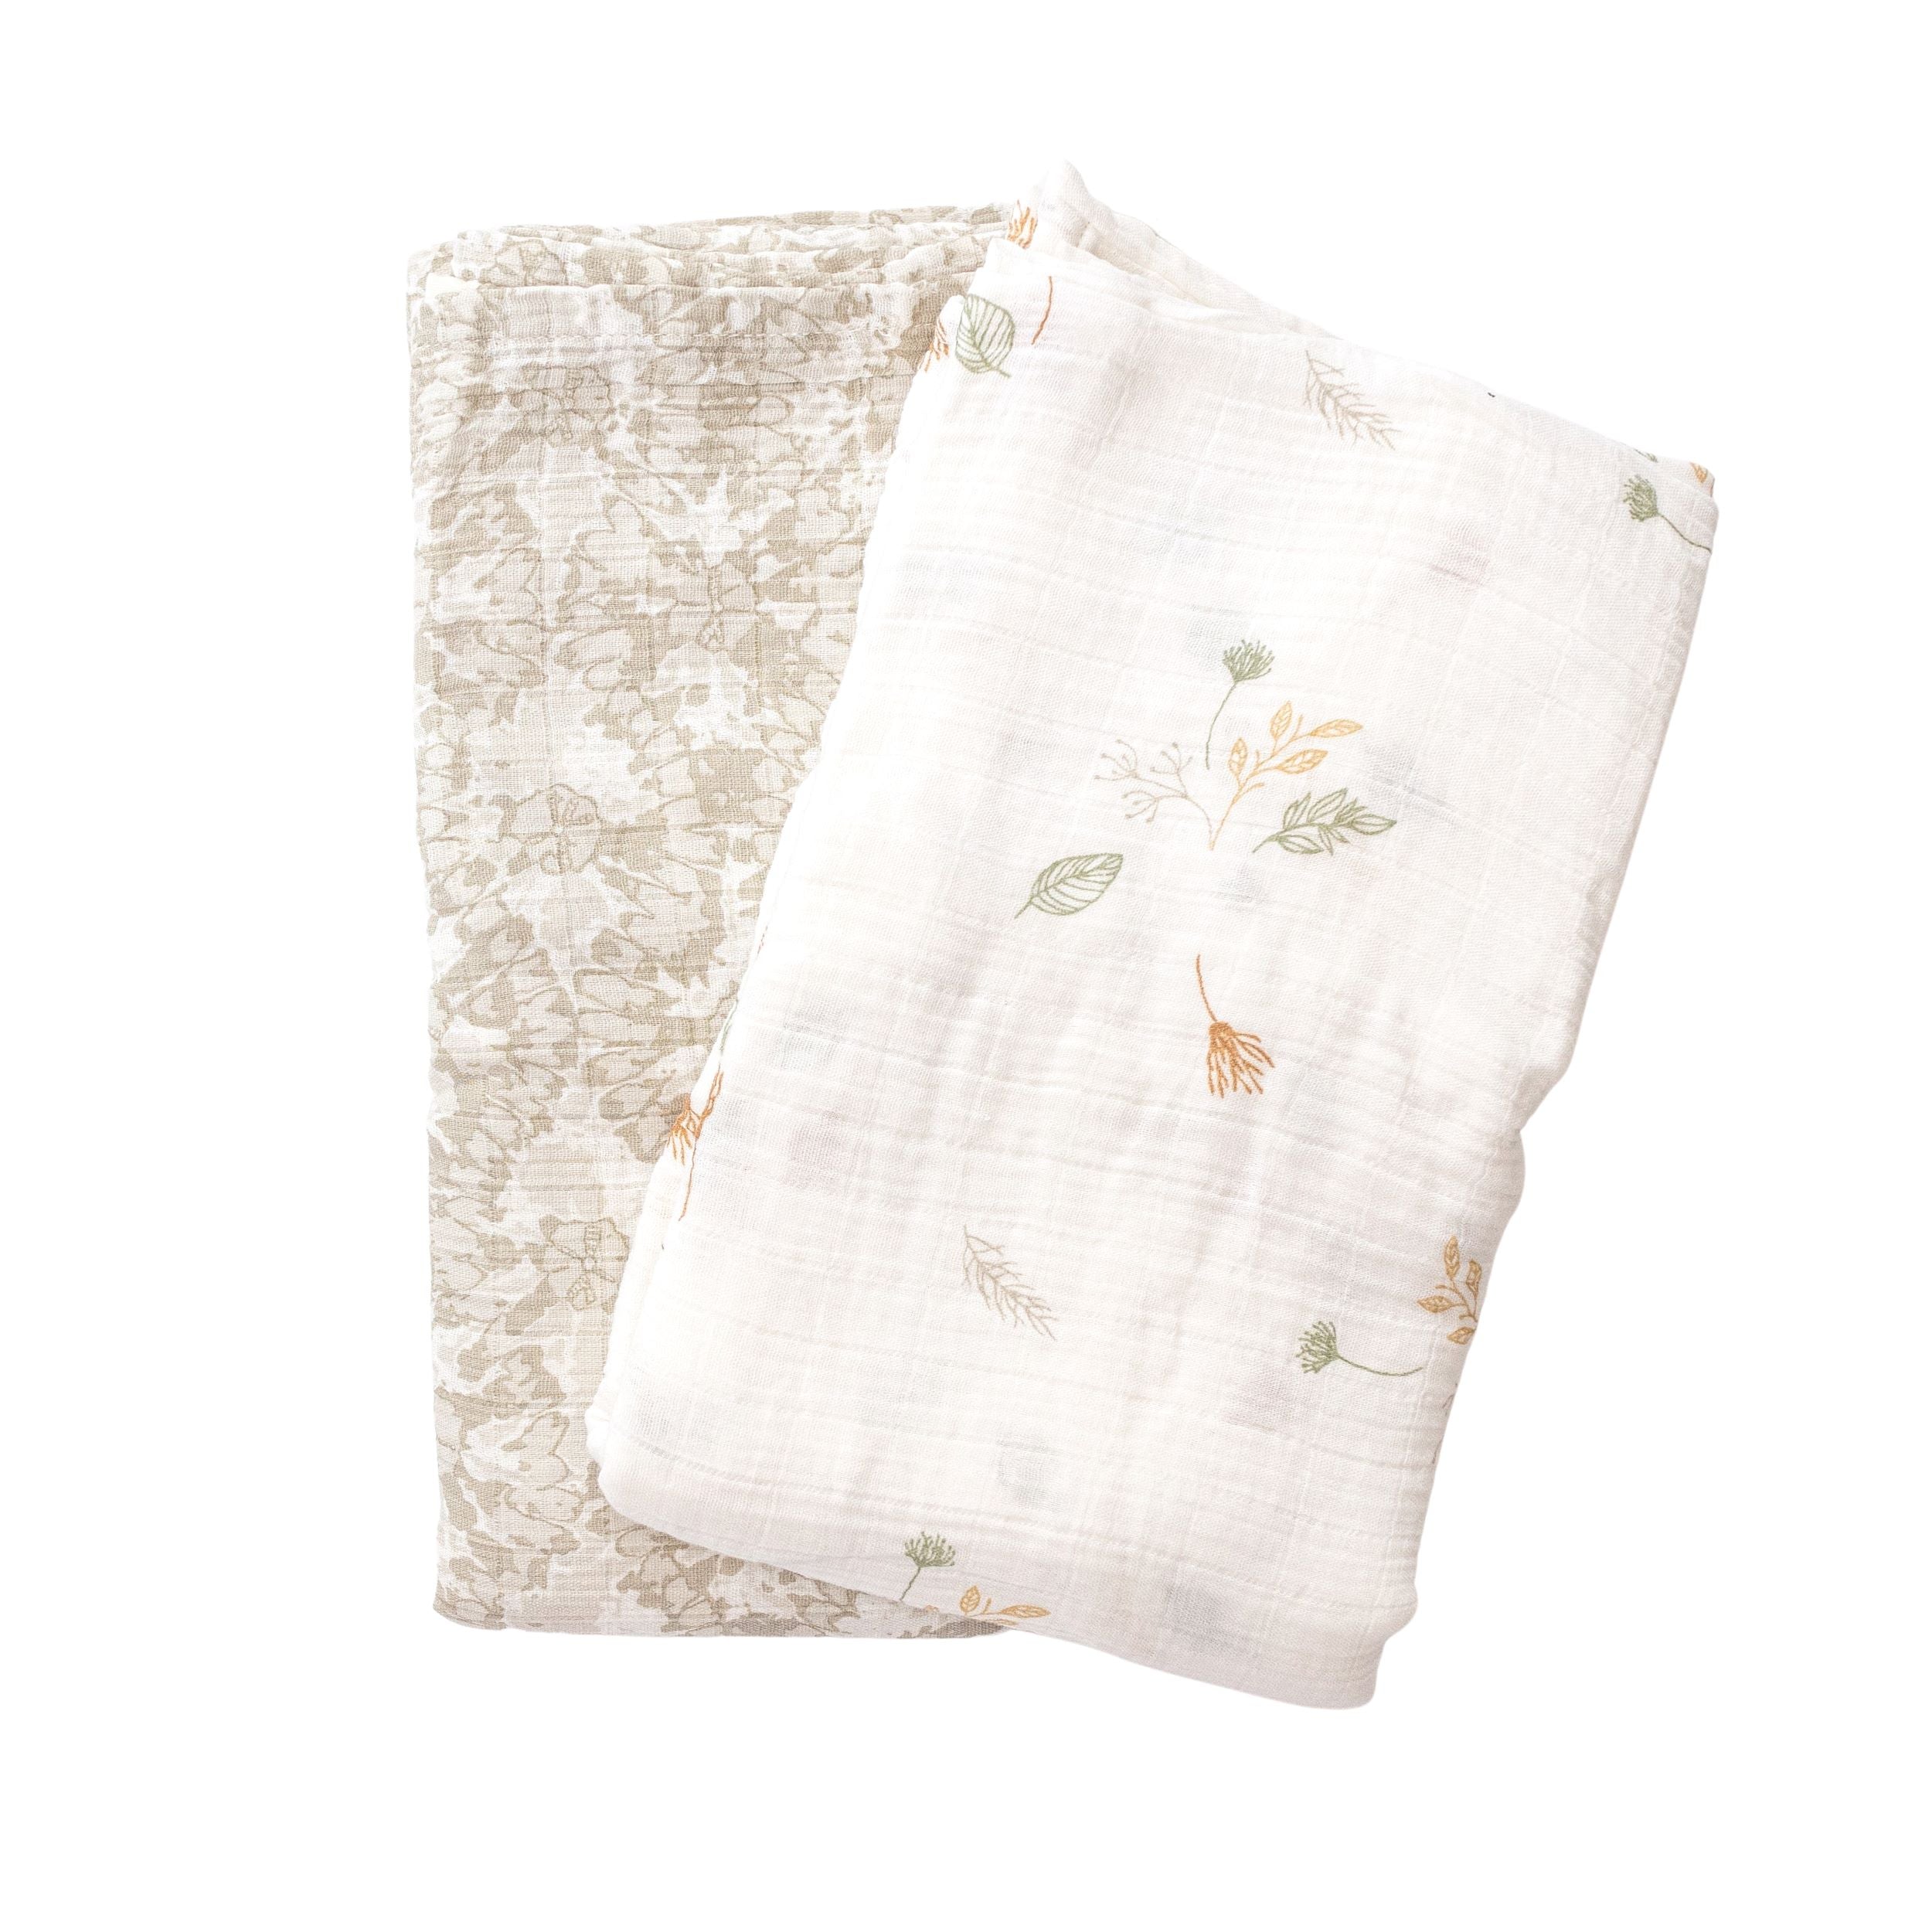 Crane Baby Muslin Swaddle Set Of 2 Dainty Leaf  Willow Collection - Cream